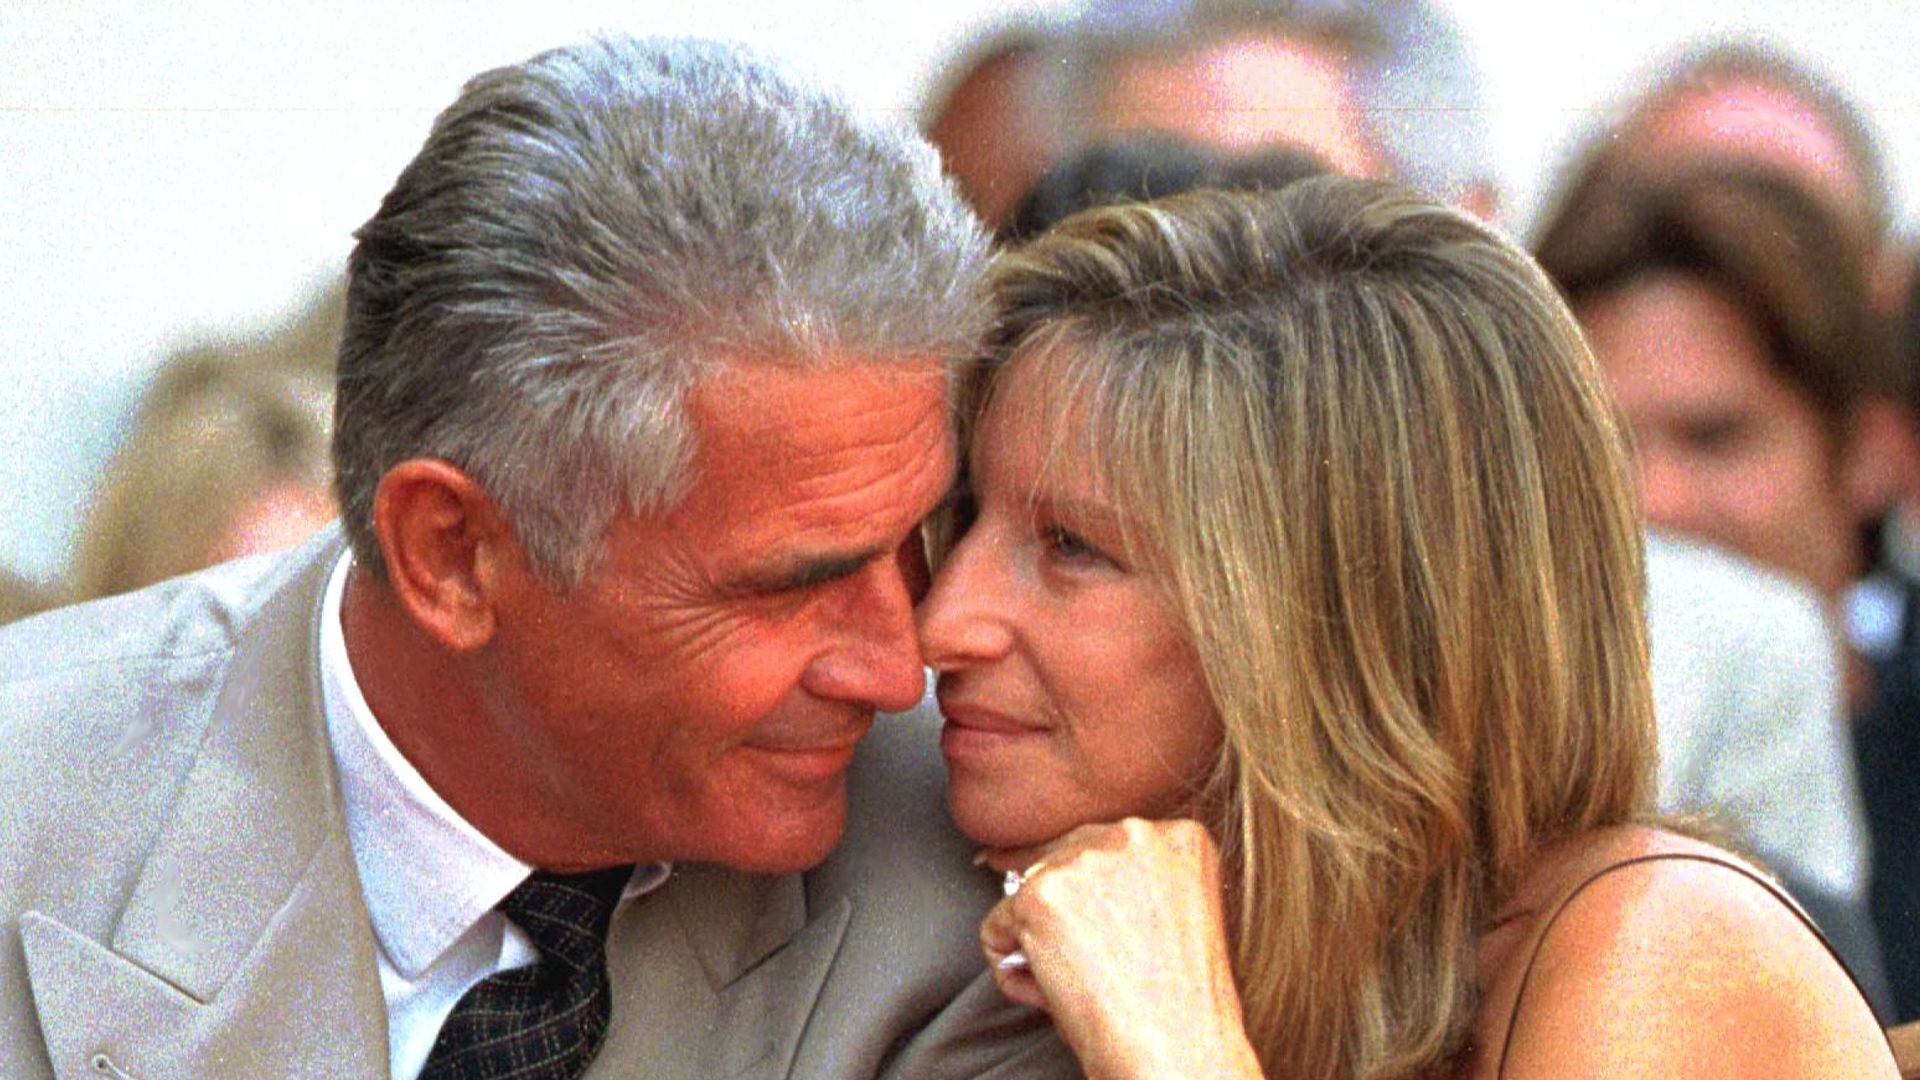 US actor James Brolin and his singer-actress wife Barbra Streisand share a tender moment during the Hollywood Walk of Fame ceremony for Brolin  27 August in Hollywood, CA.